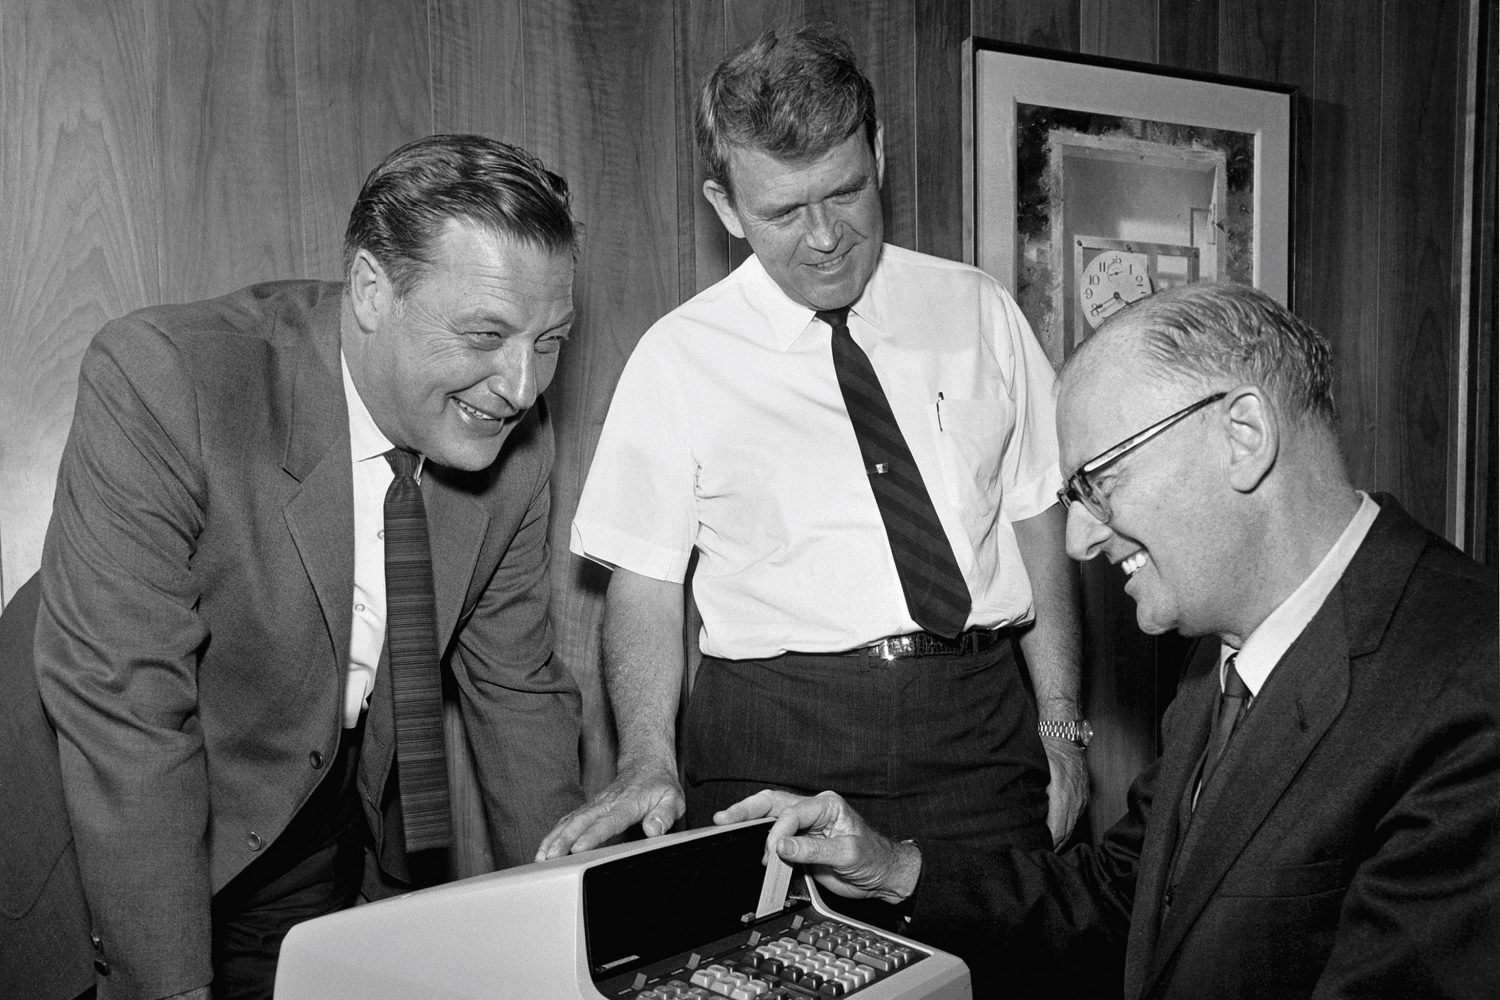 Barney Oliver and Bill Hewlett showing science fiction author Arthur C. Clarke a prototype of the HP 9100A. 